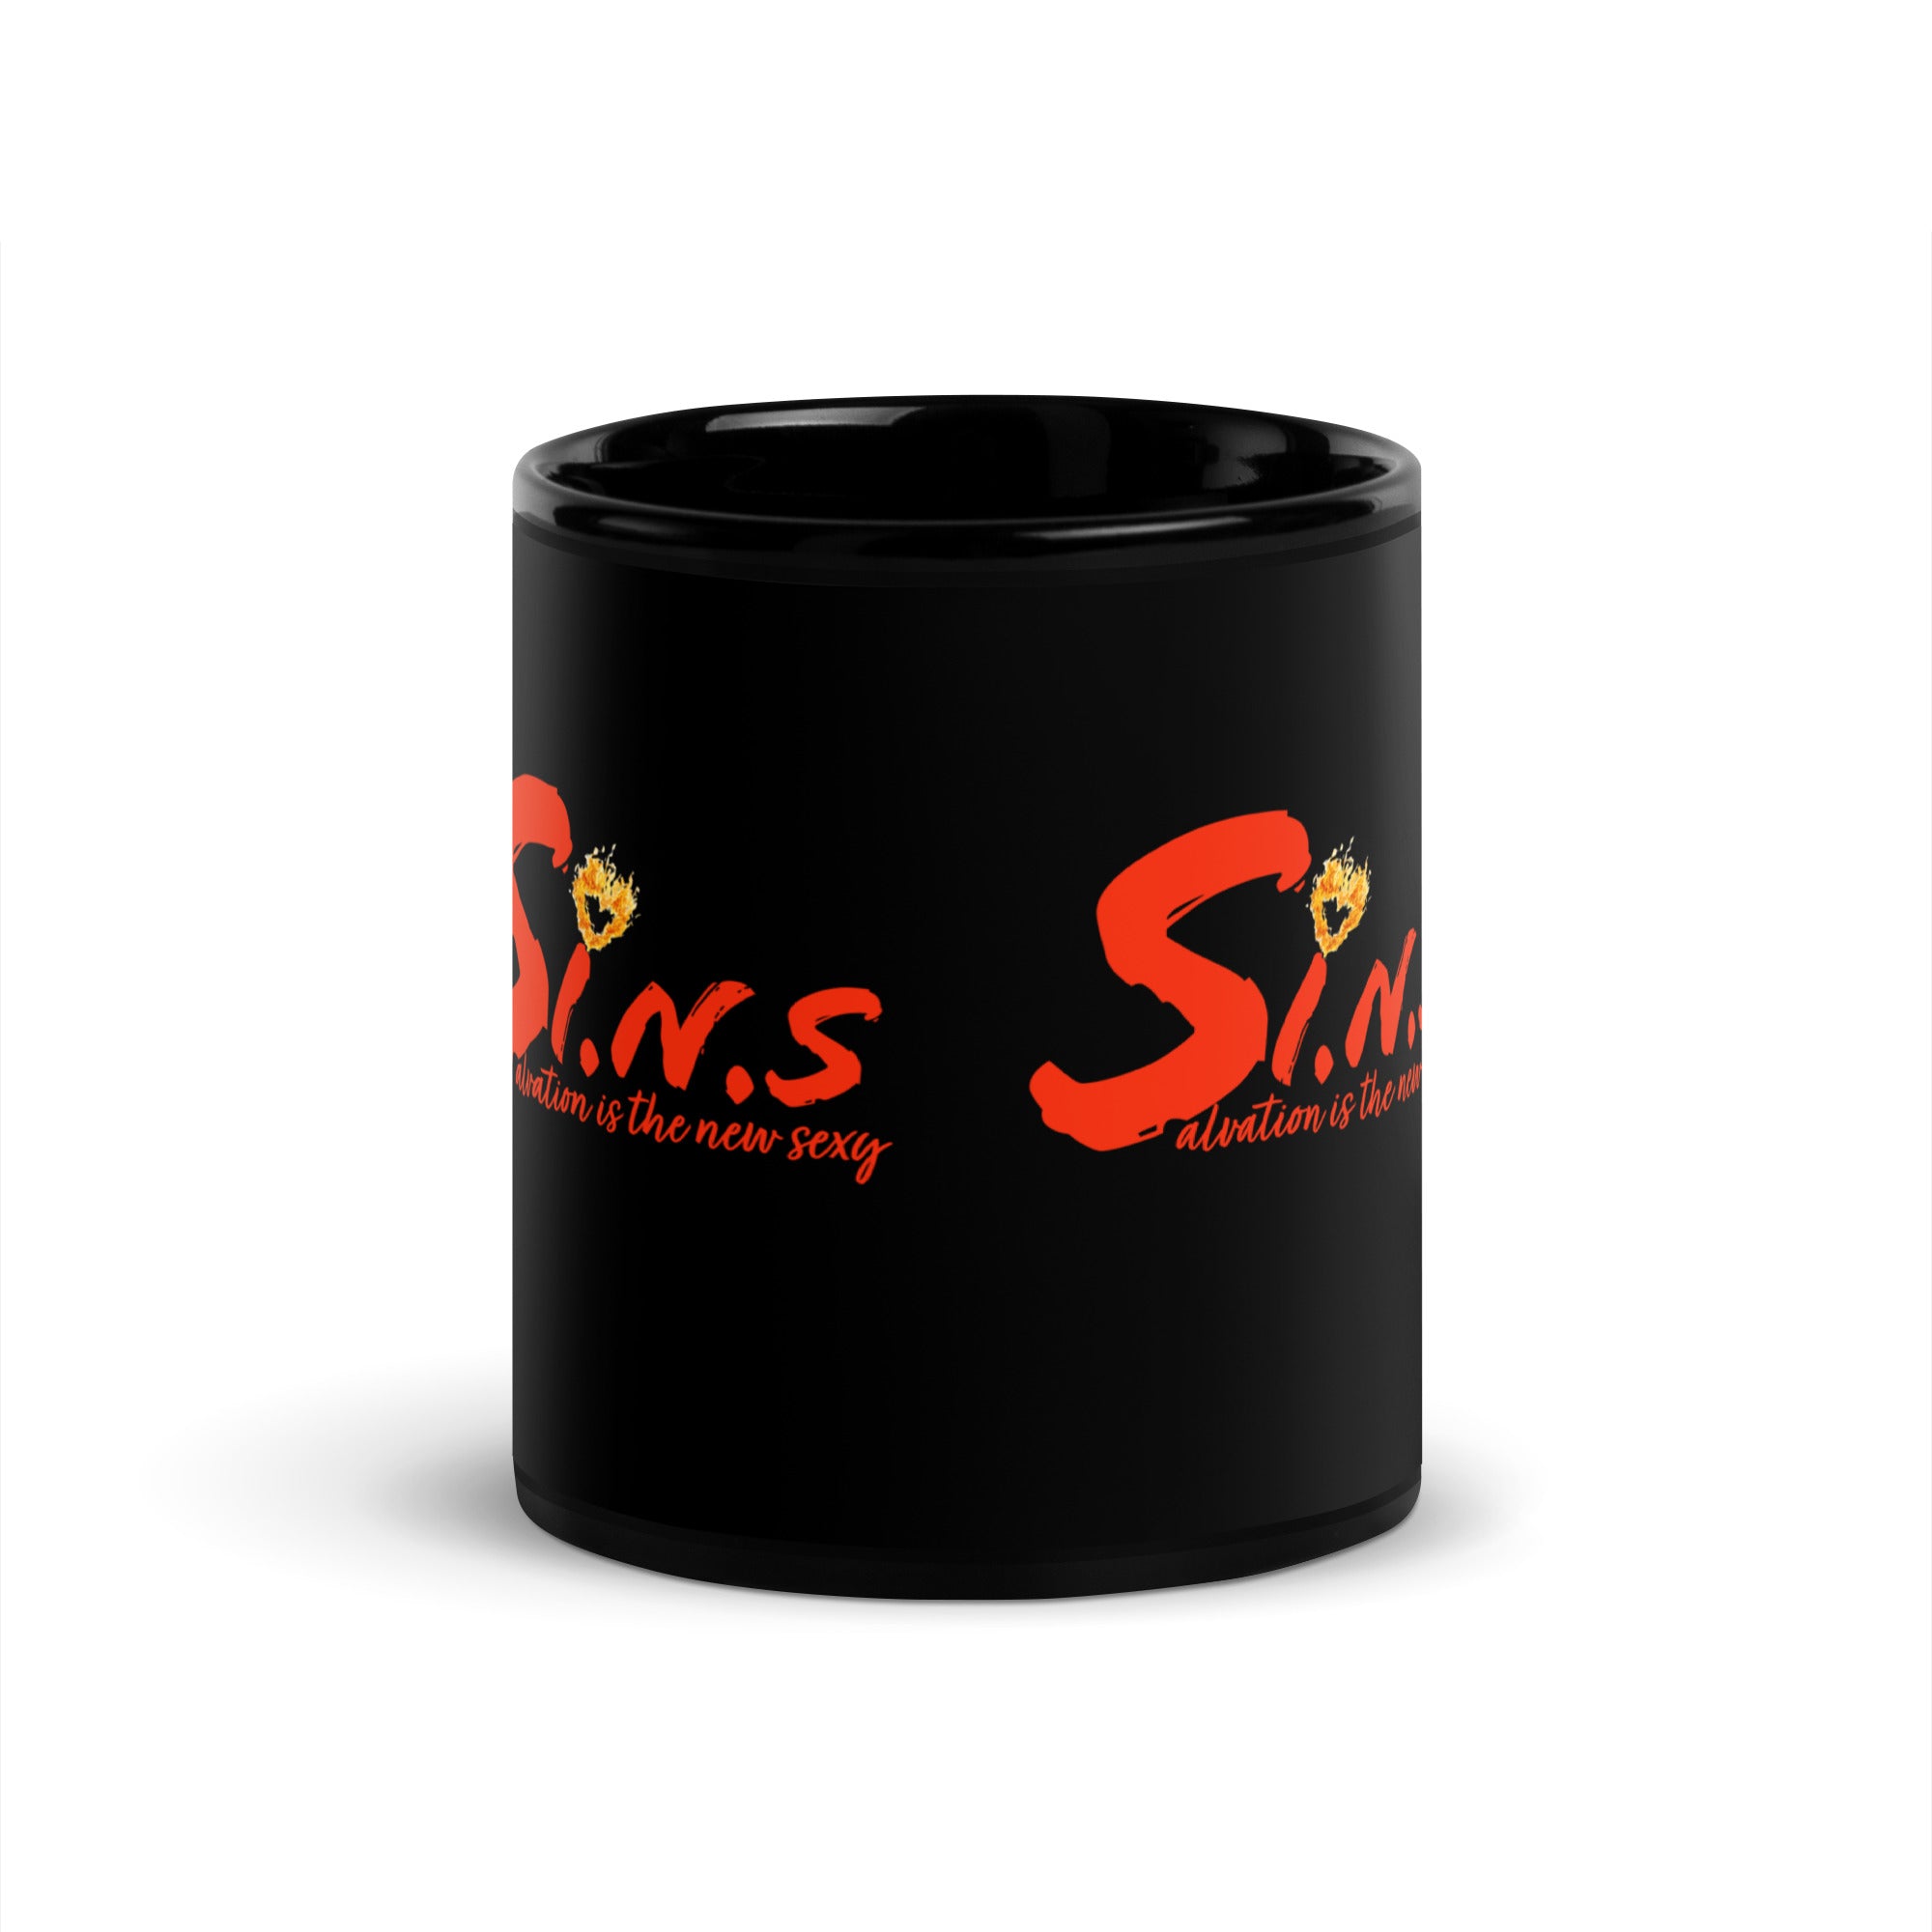 S.I.N.S: Salvation is the New Sexy Black Glossy Mug